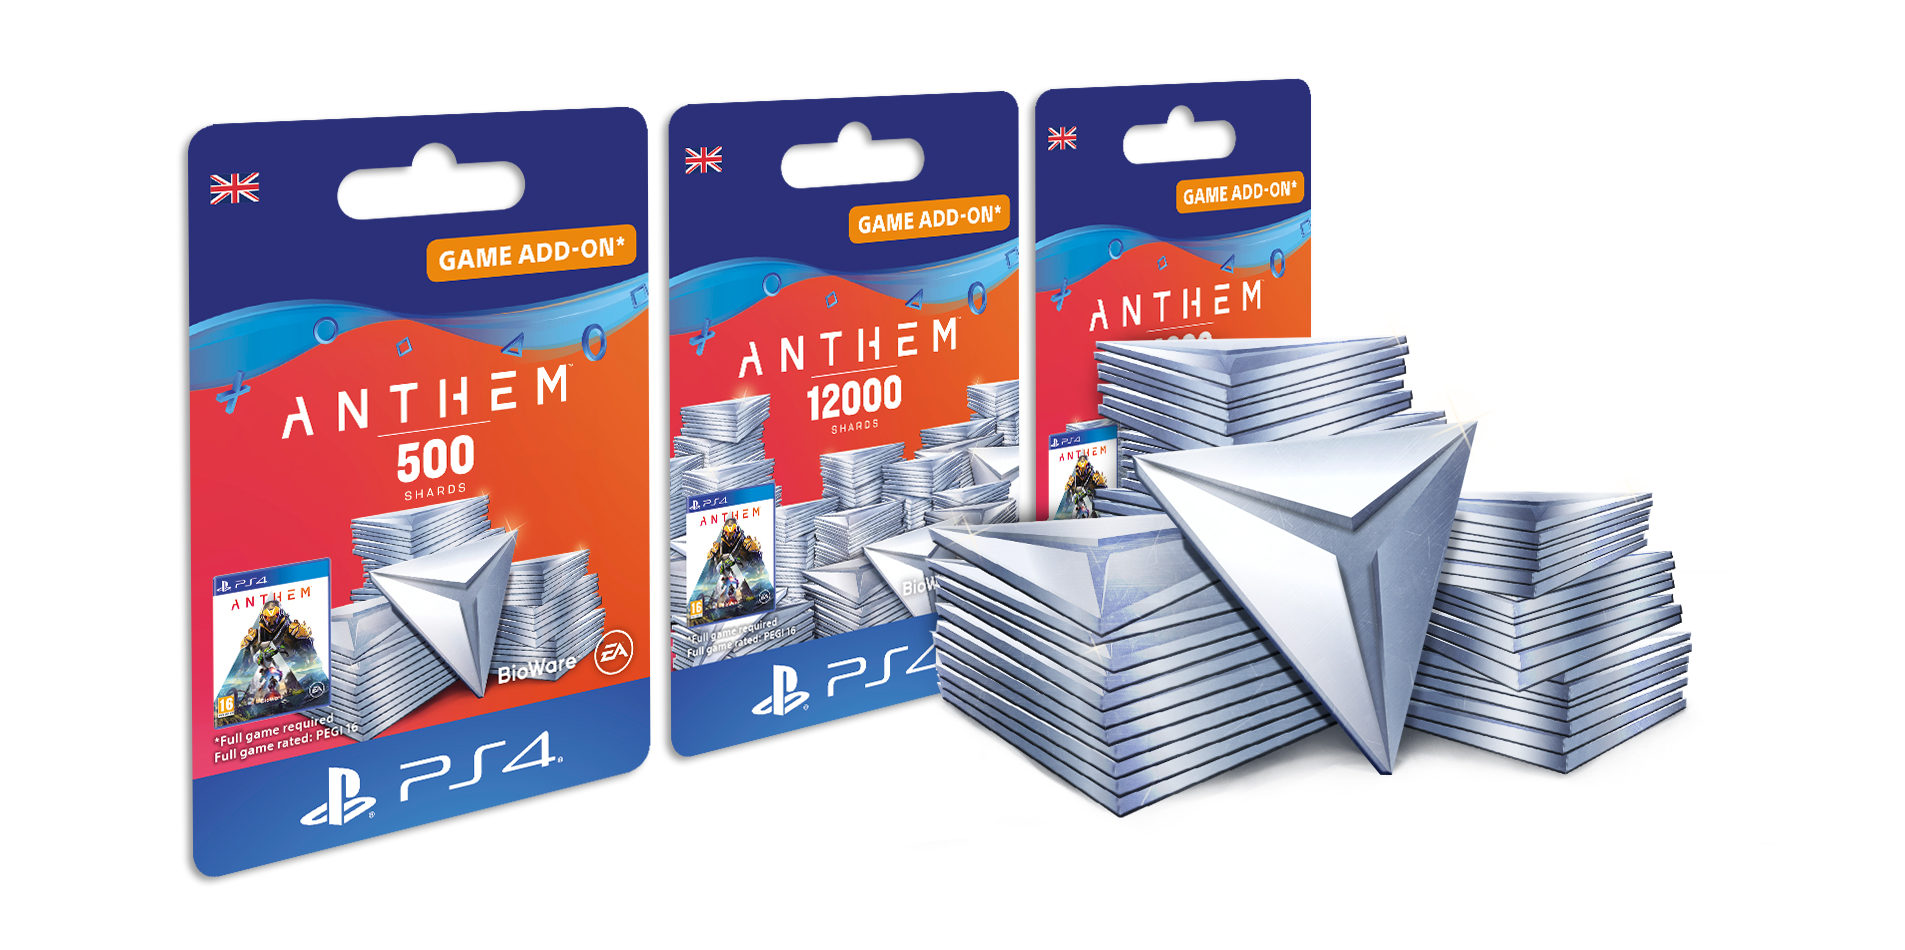 Anthem_CurrencyCards